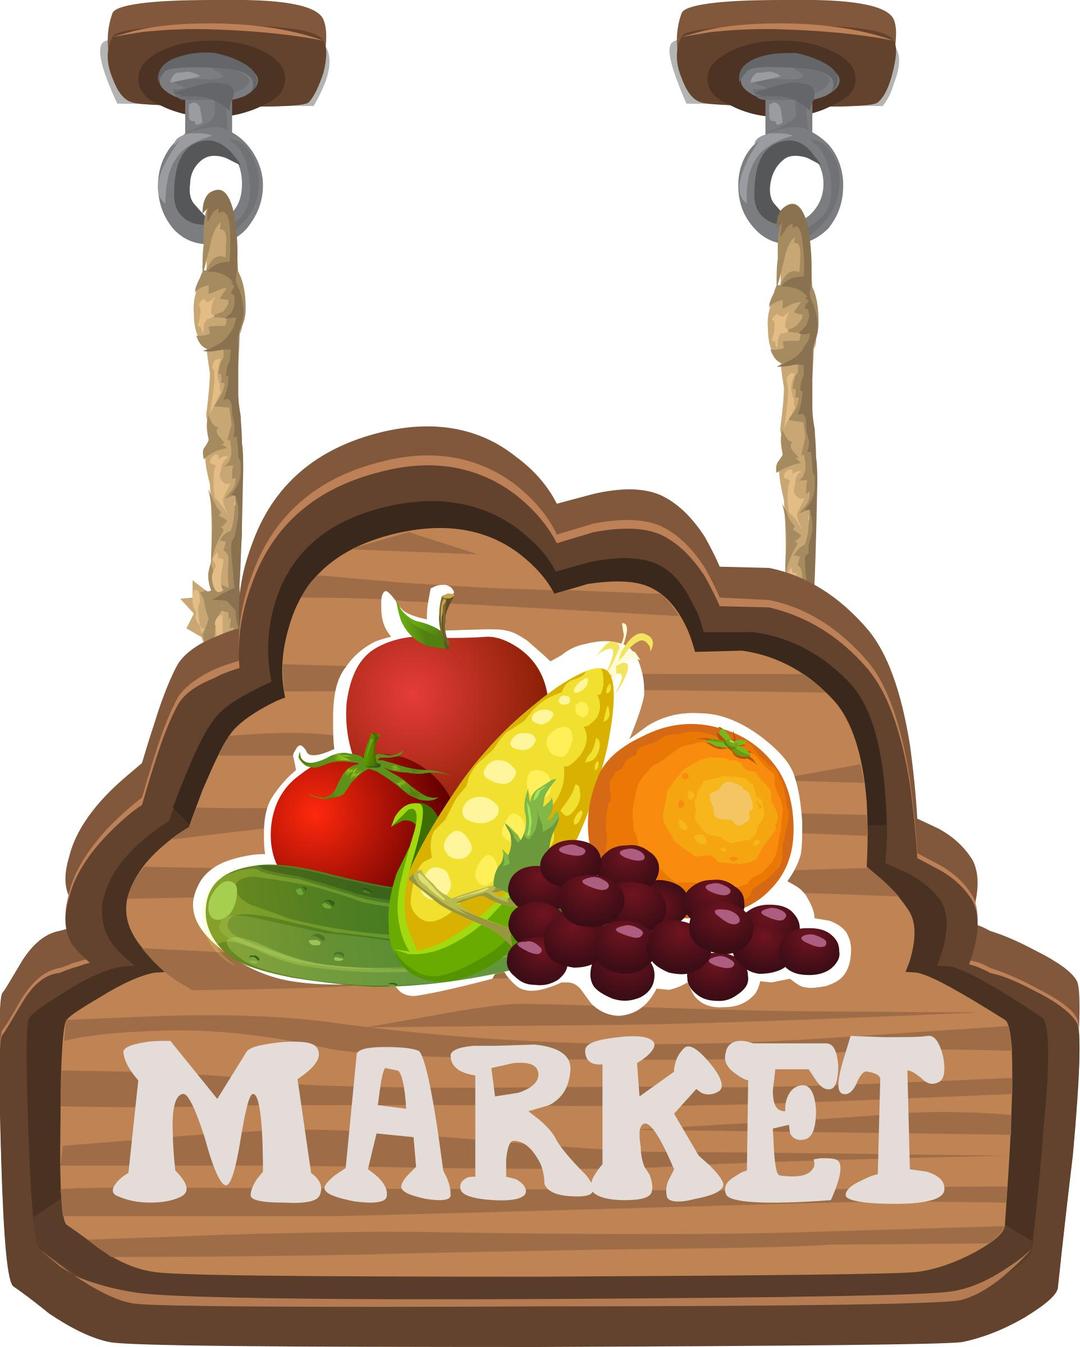 Sign for a fruit & veg market from Glitch png transparent